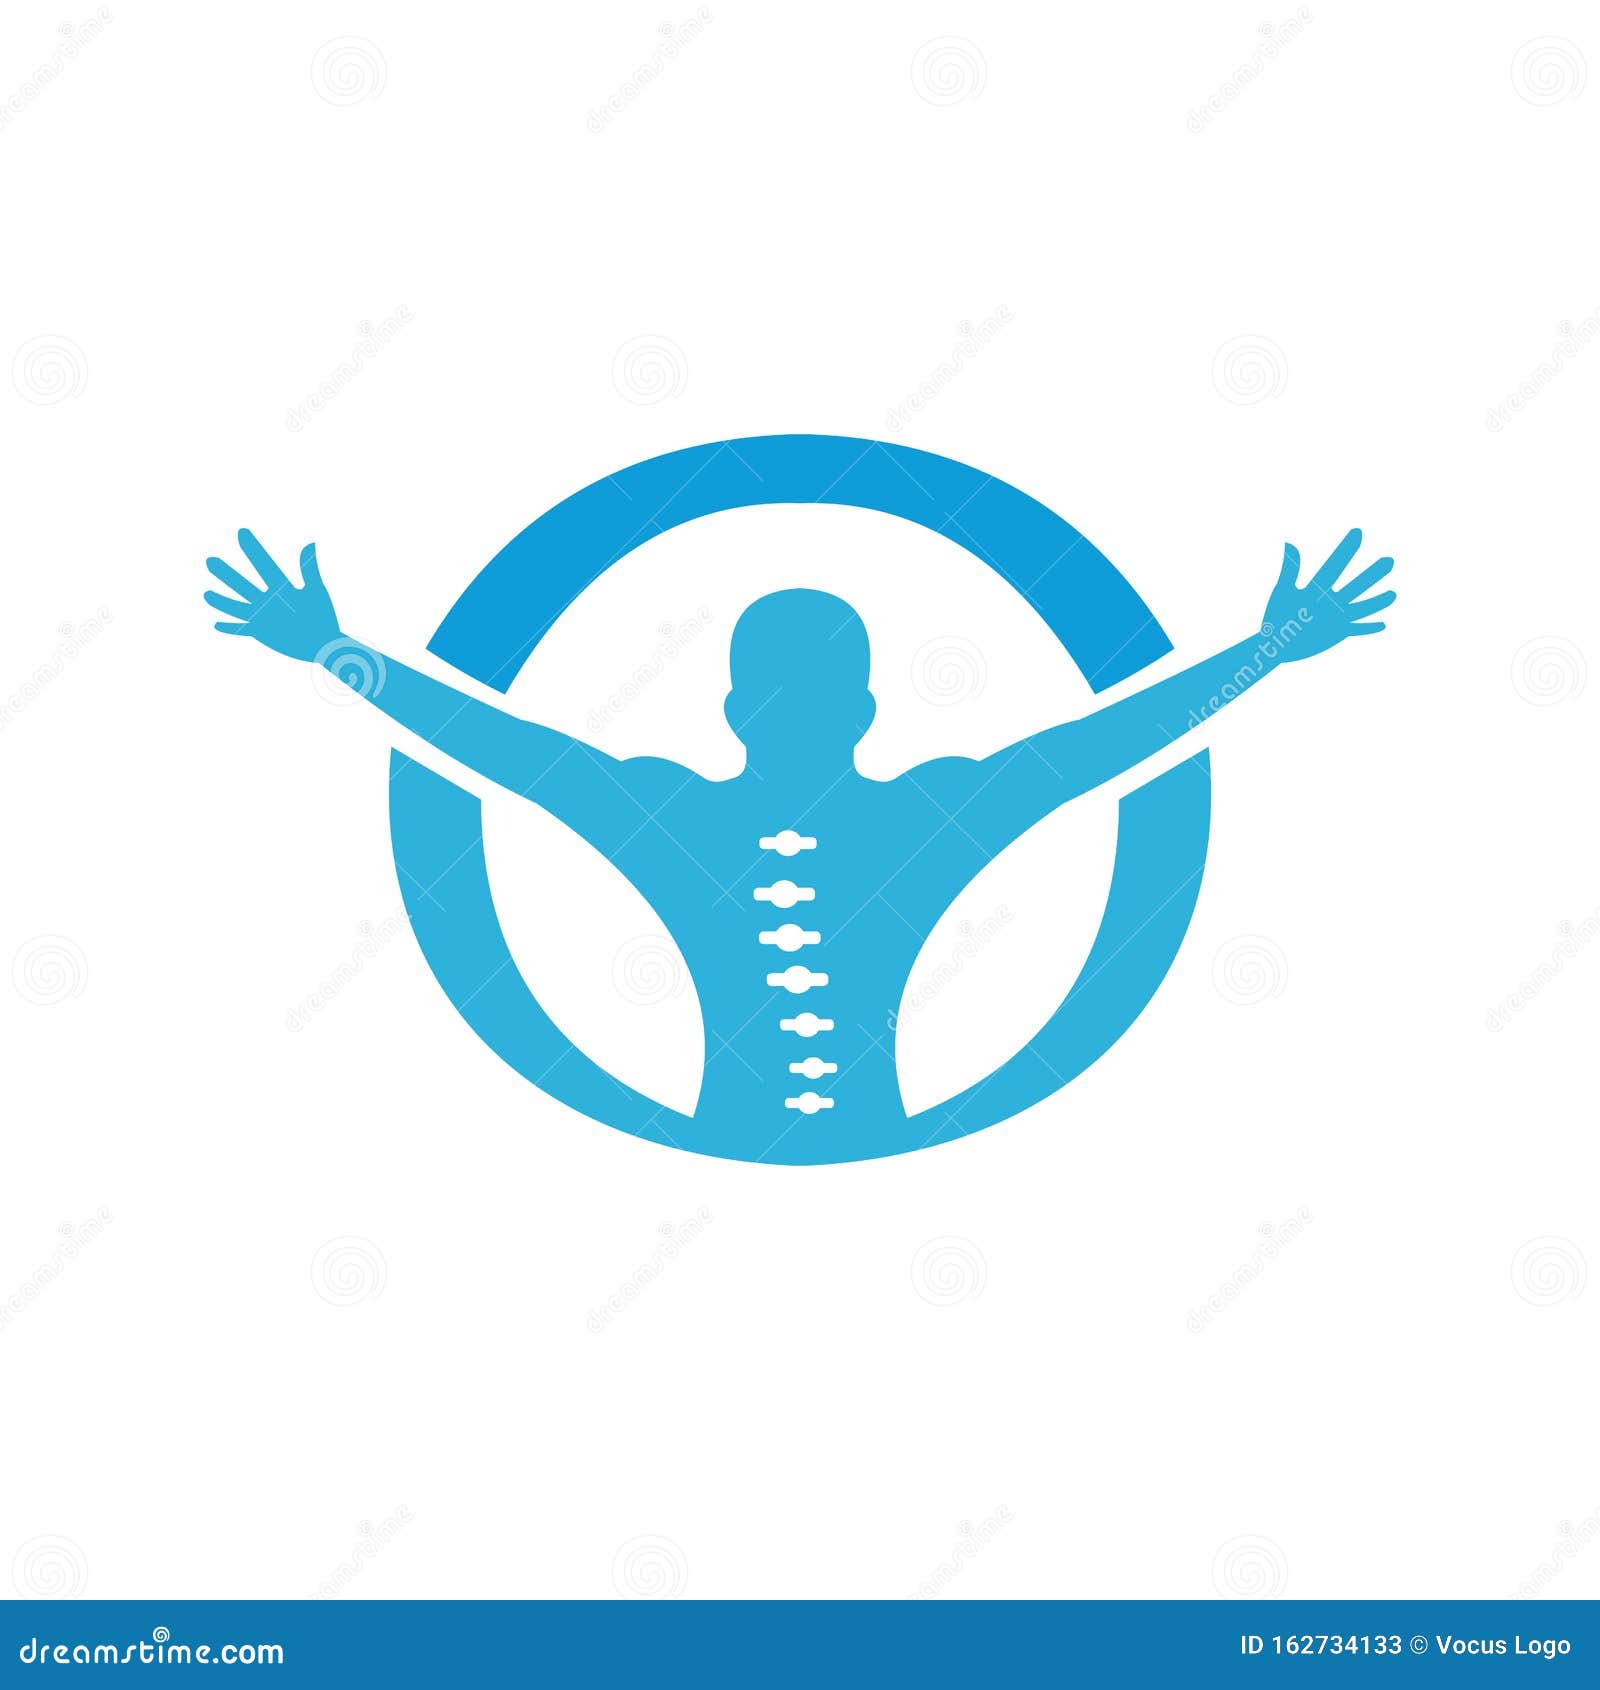 physical therapy logo ideas 4